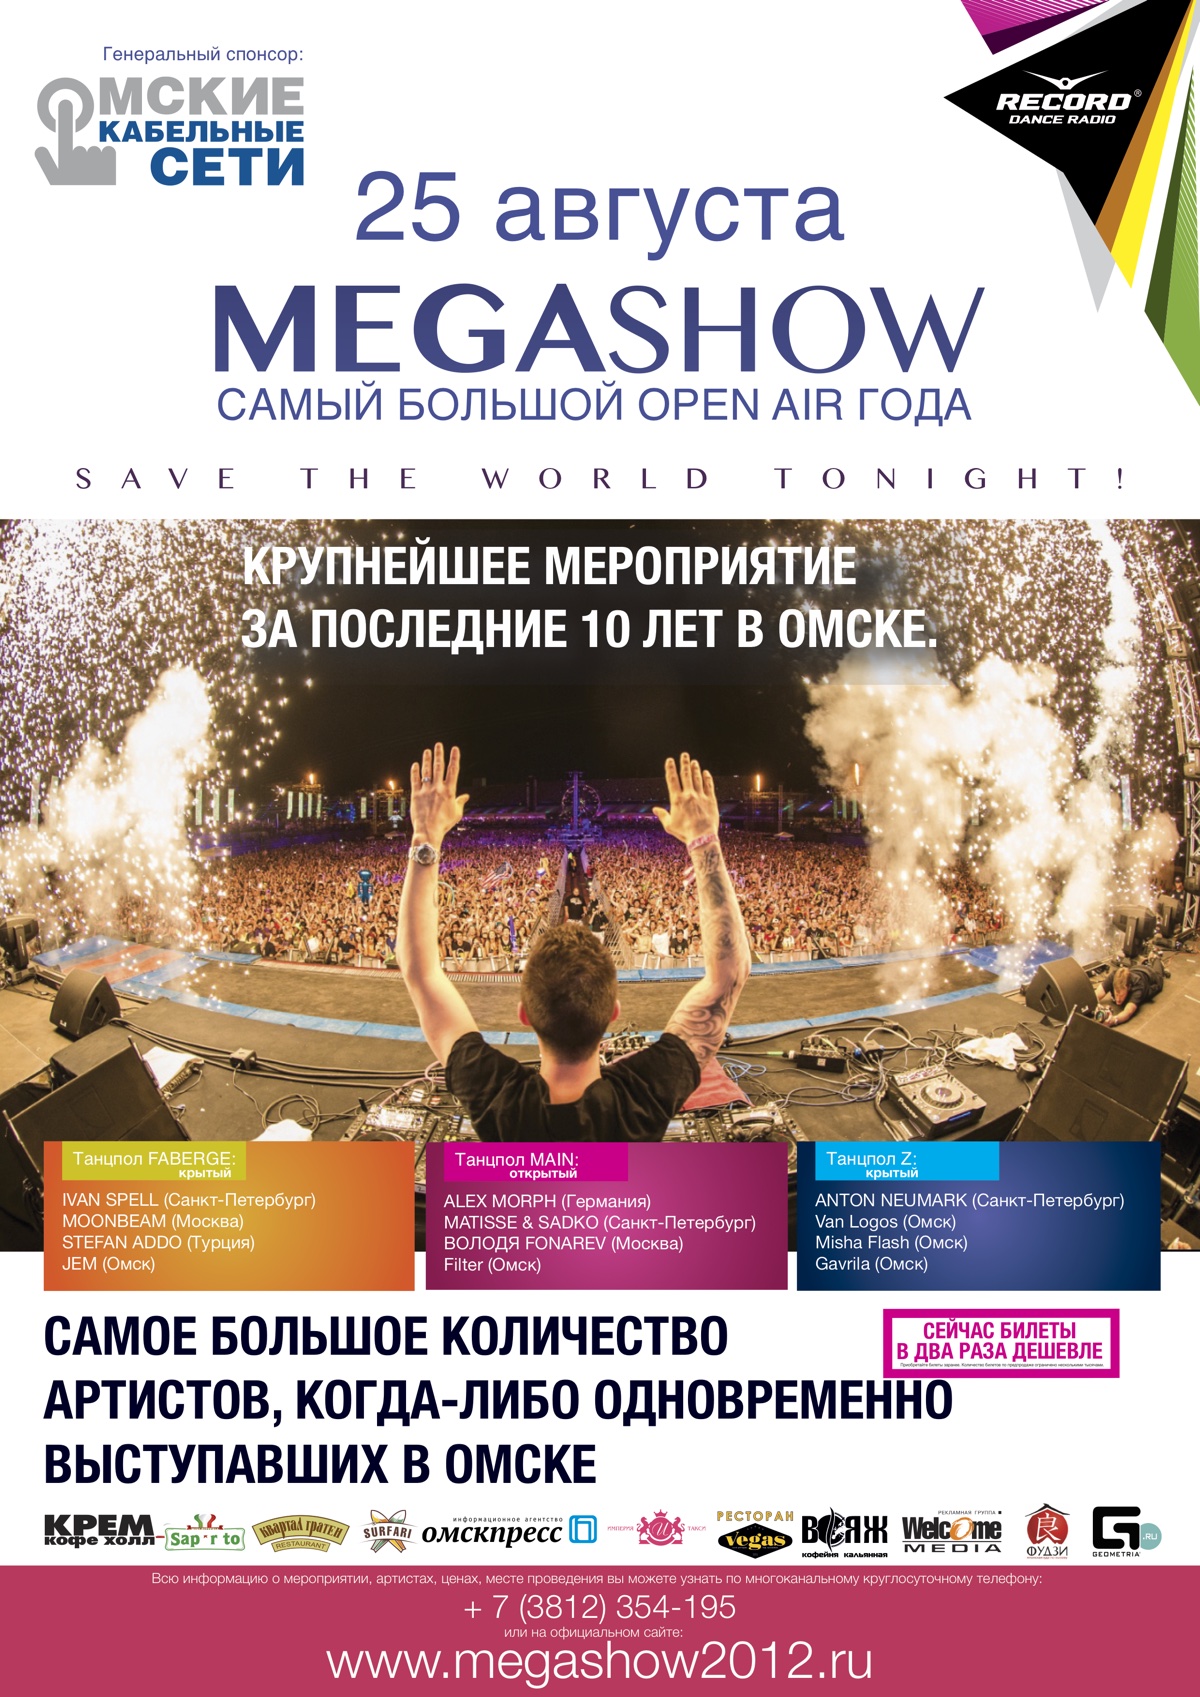 Megashow poster the most expensive and extensive event in the history of Omsk 25 august 2012 Oleg Borisov Omsk Moscow Russia